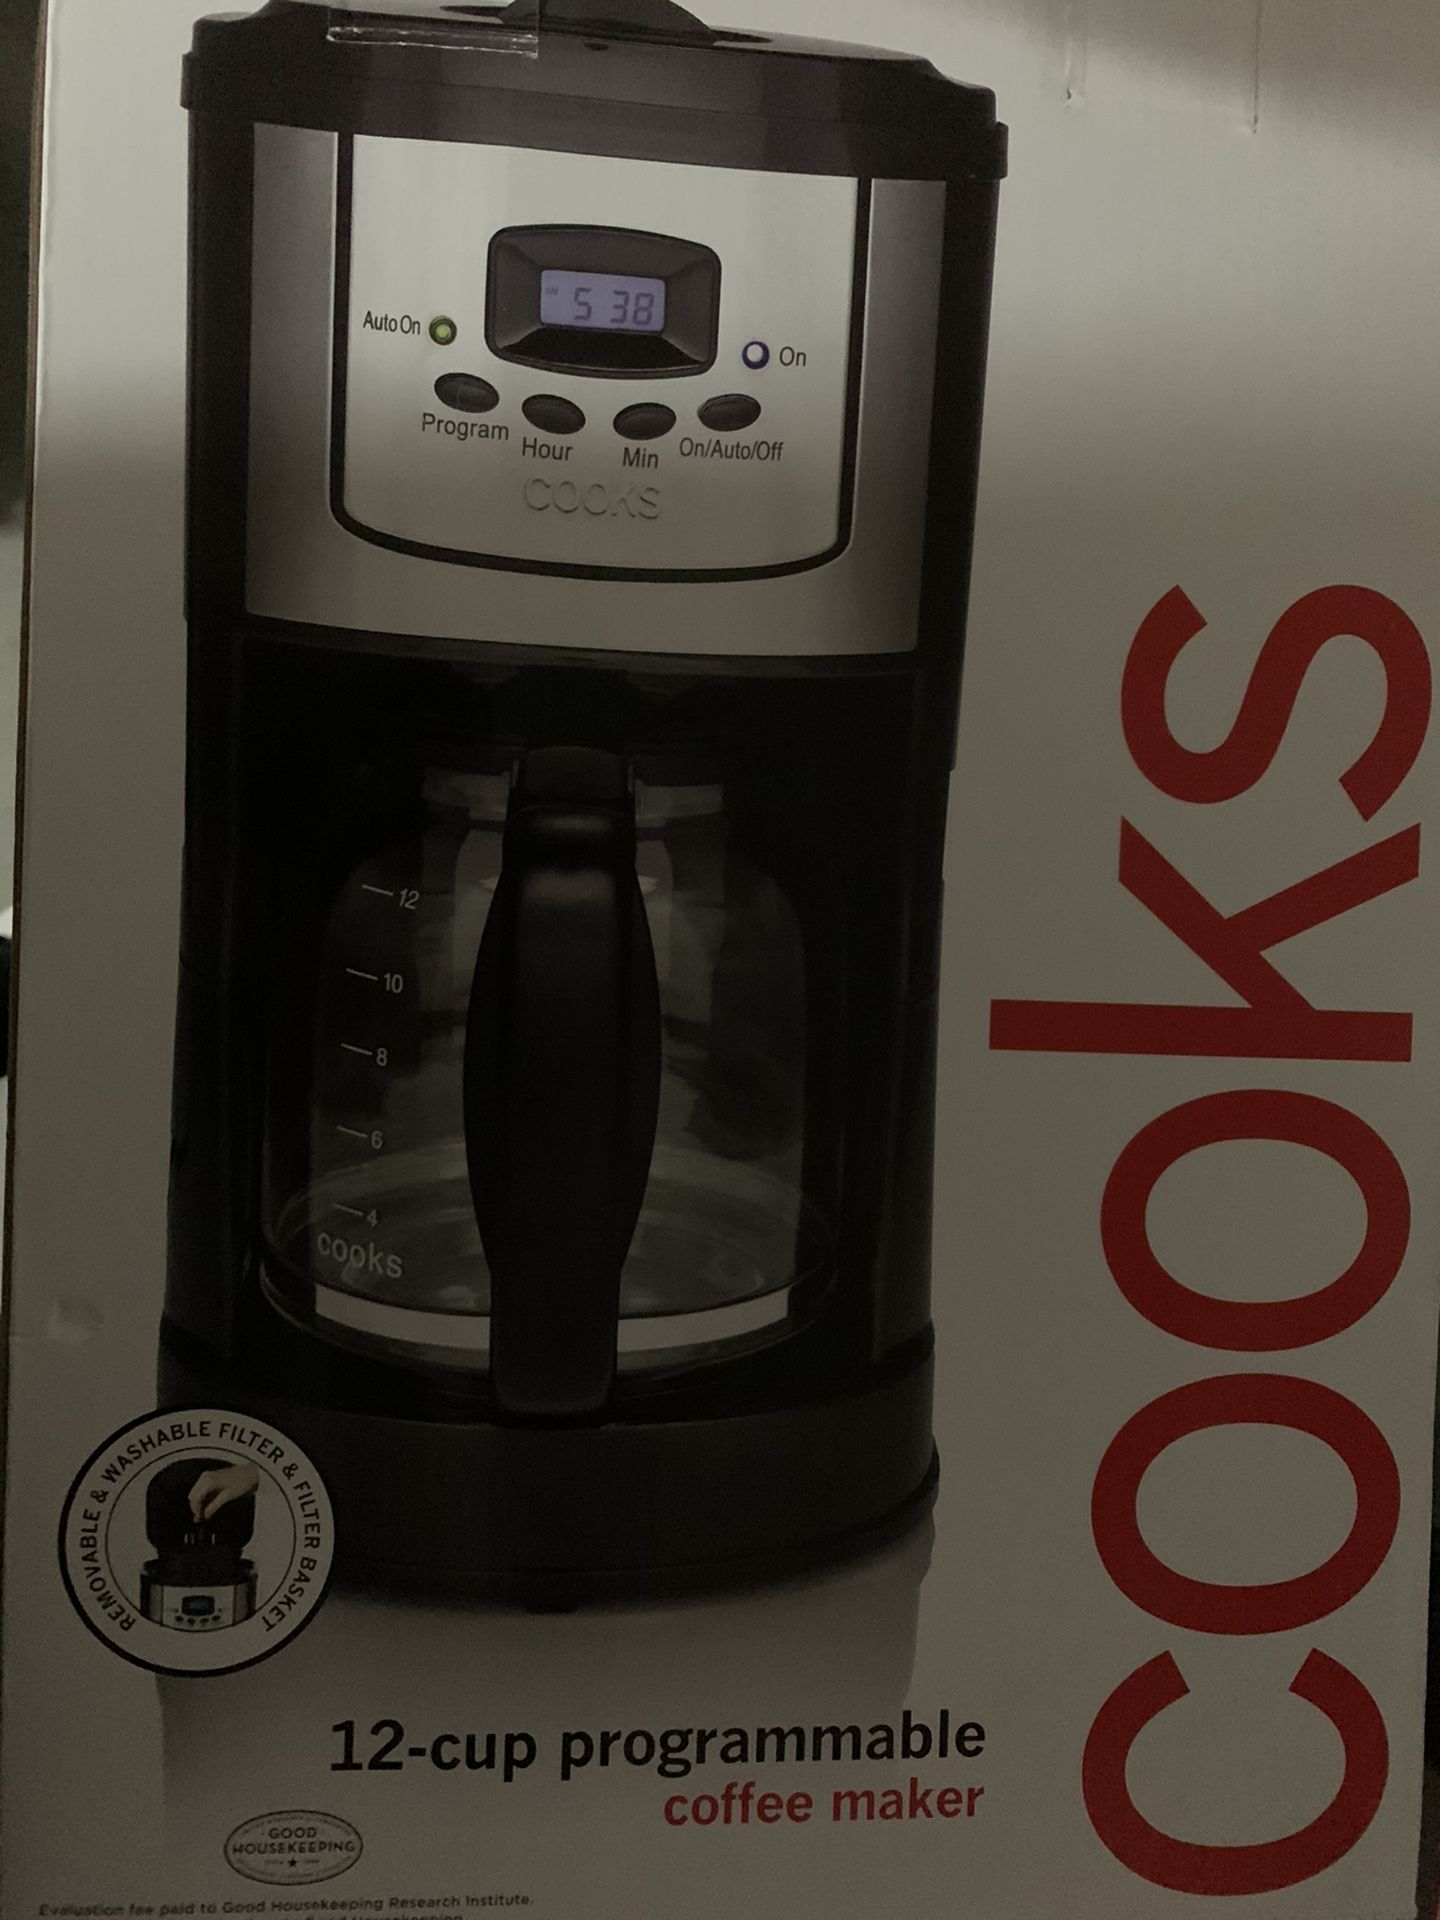 Cooks 12 cup programable coffee maker